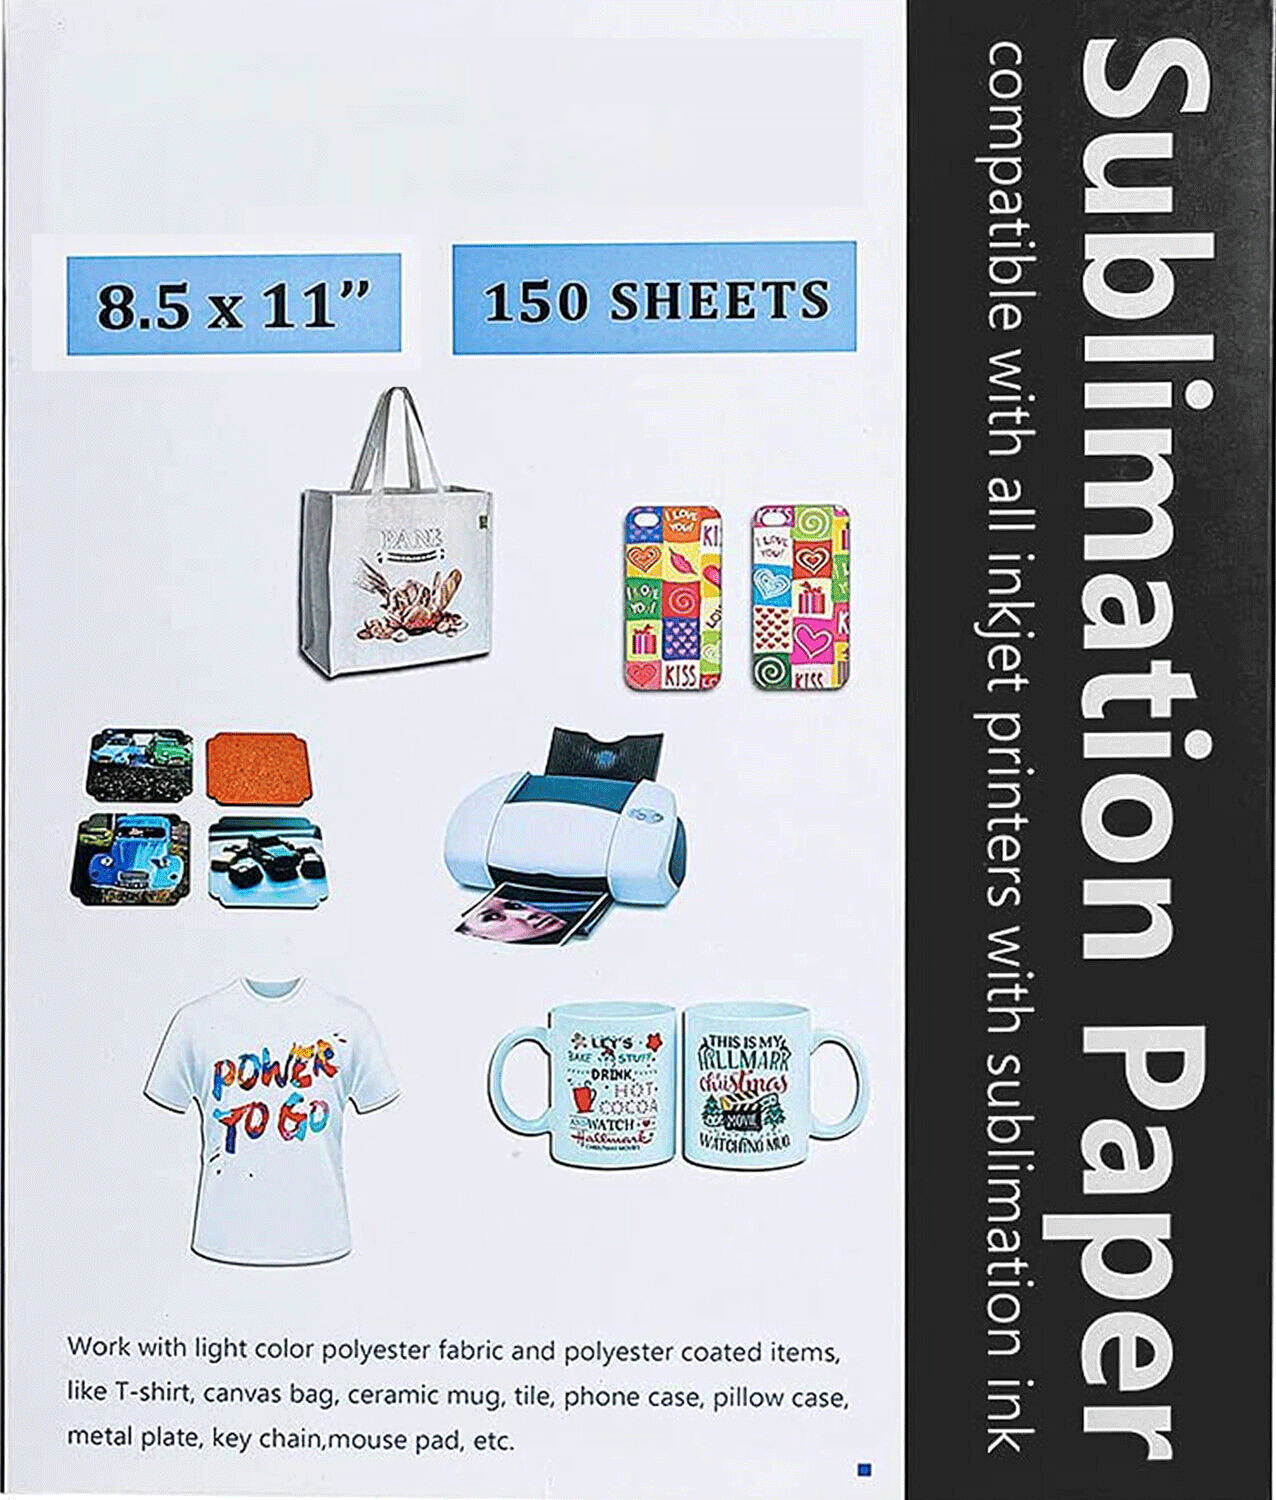 HTVRONT Sublimation Paper 8.5 x 11 Inches - 150 Sheets 105g Excellent Ink  Release Sublimation Transfer Paper for Tumblers, Mugs, T-shirts